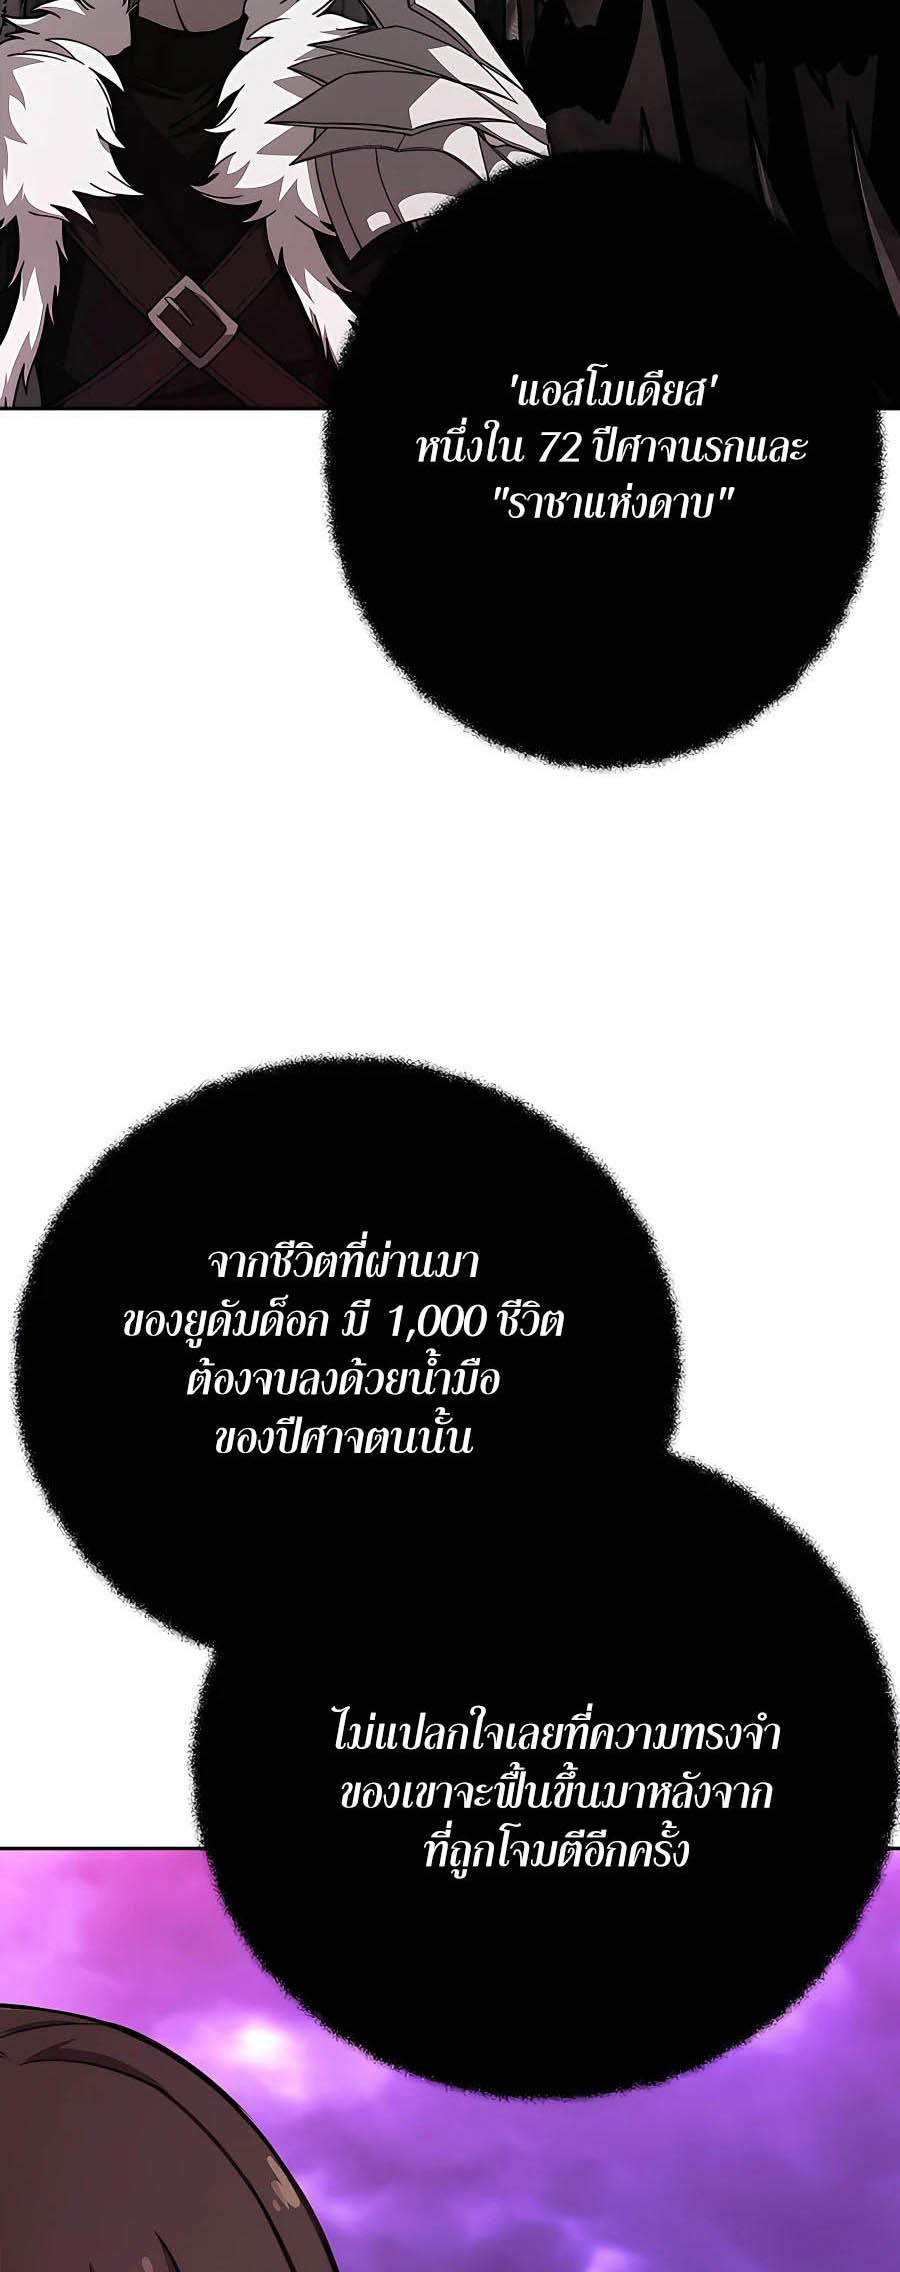 à¸­à¹ˆà¸²à¸™à¸¡à¸±à¸™à¸®à¸§à¸² à¹€à¸£à¸·à¹ˆà¸­à¸‡ The Part Time Land of the Gods 55 49